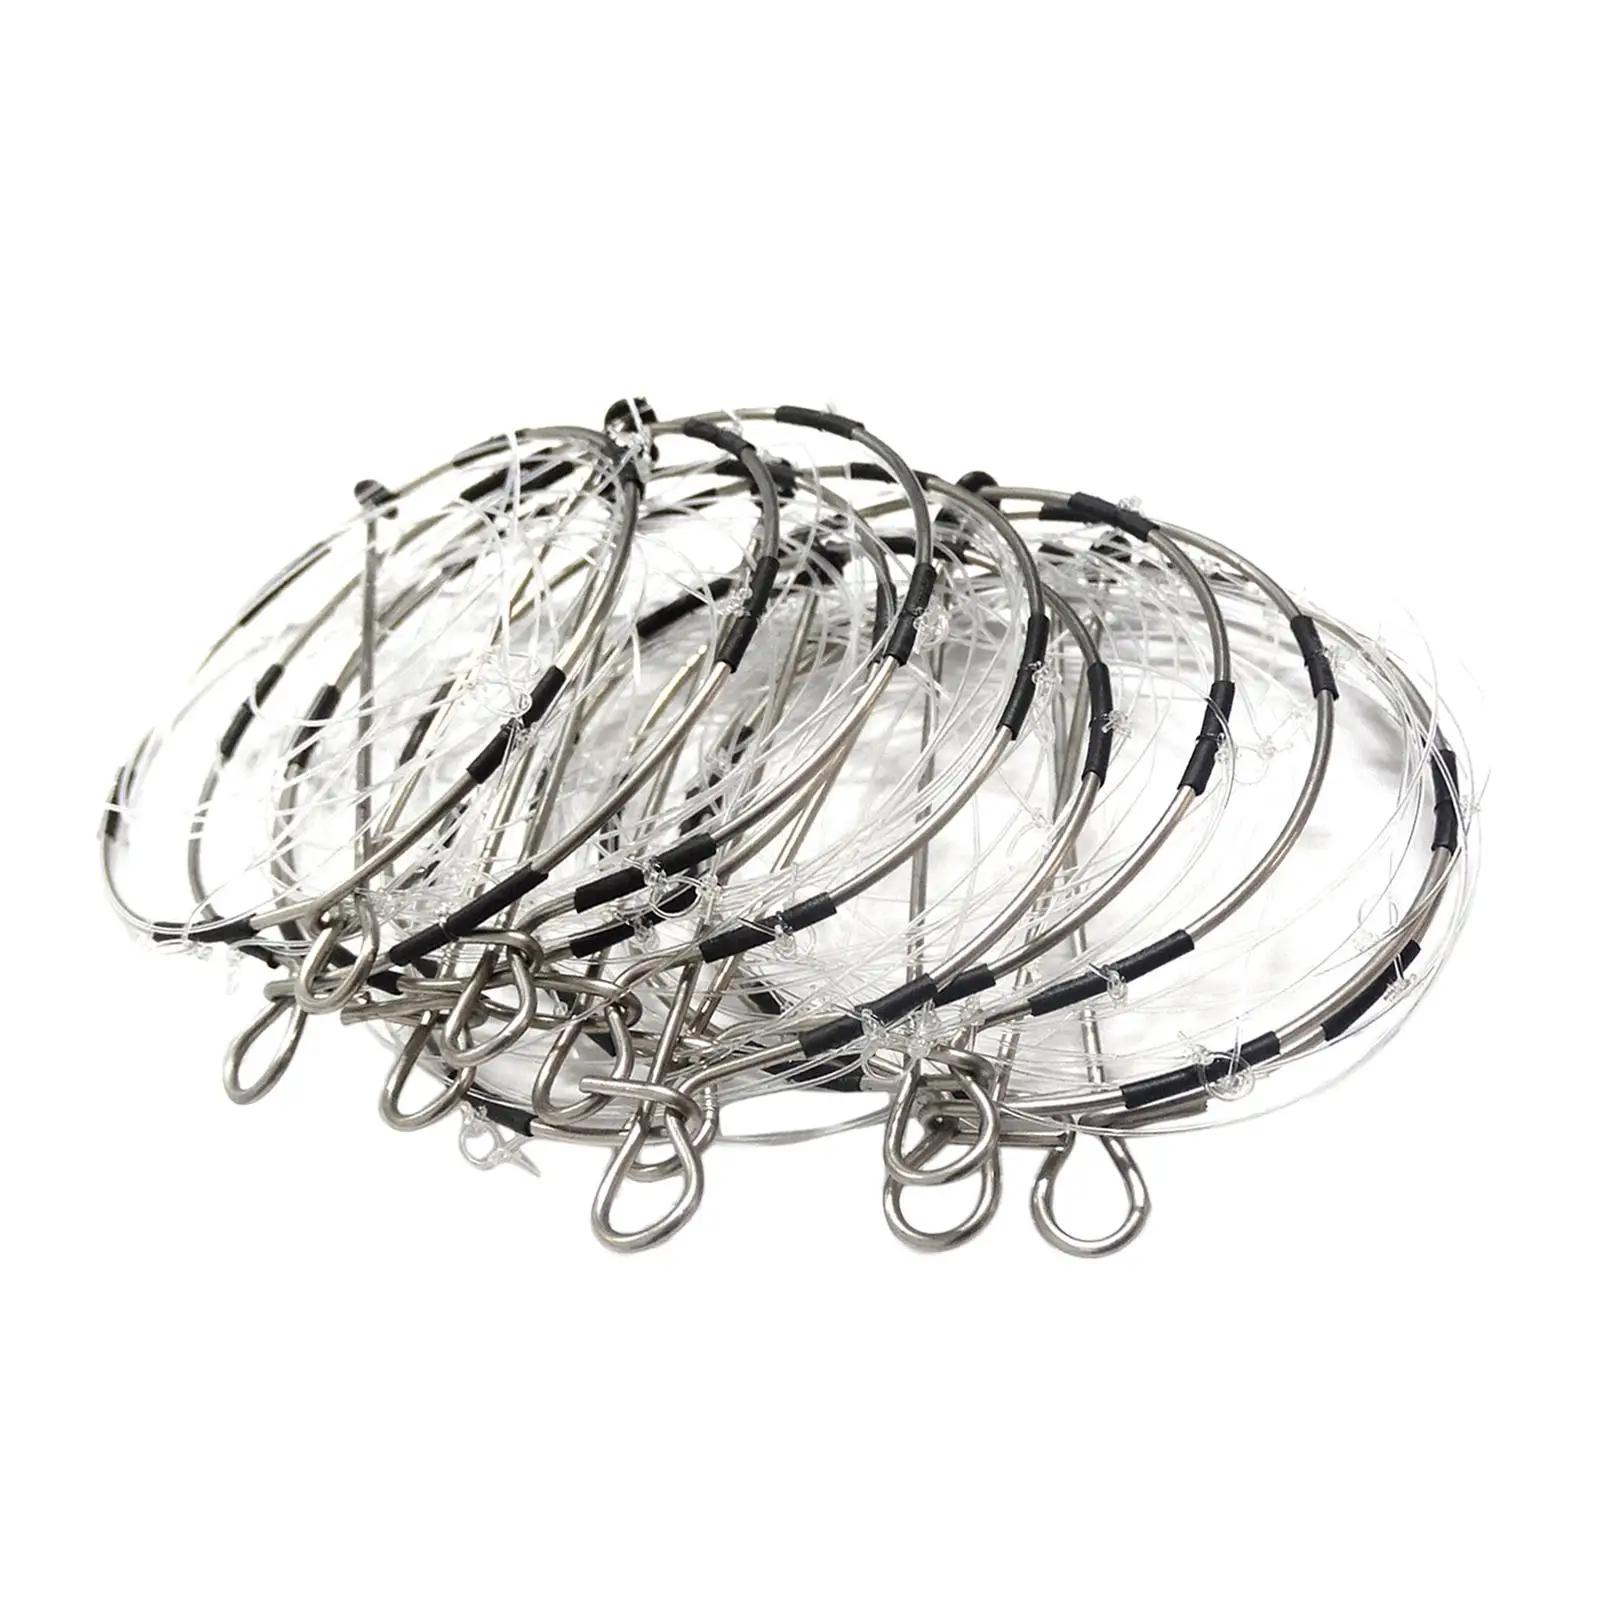 10x Crab Cast Trap Cast Dip Cage Collapsible Portable 6 Ring Repeated Use Steel for Lobster Crawdad Prawn Crab shrimp